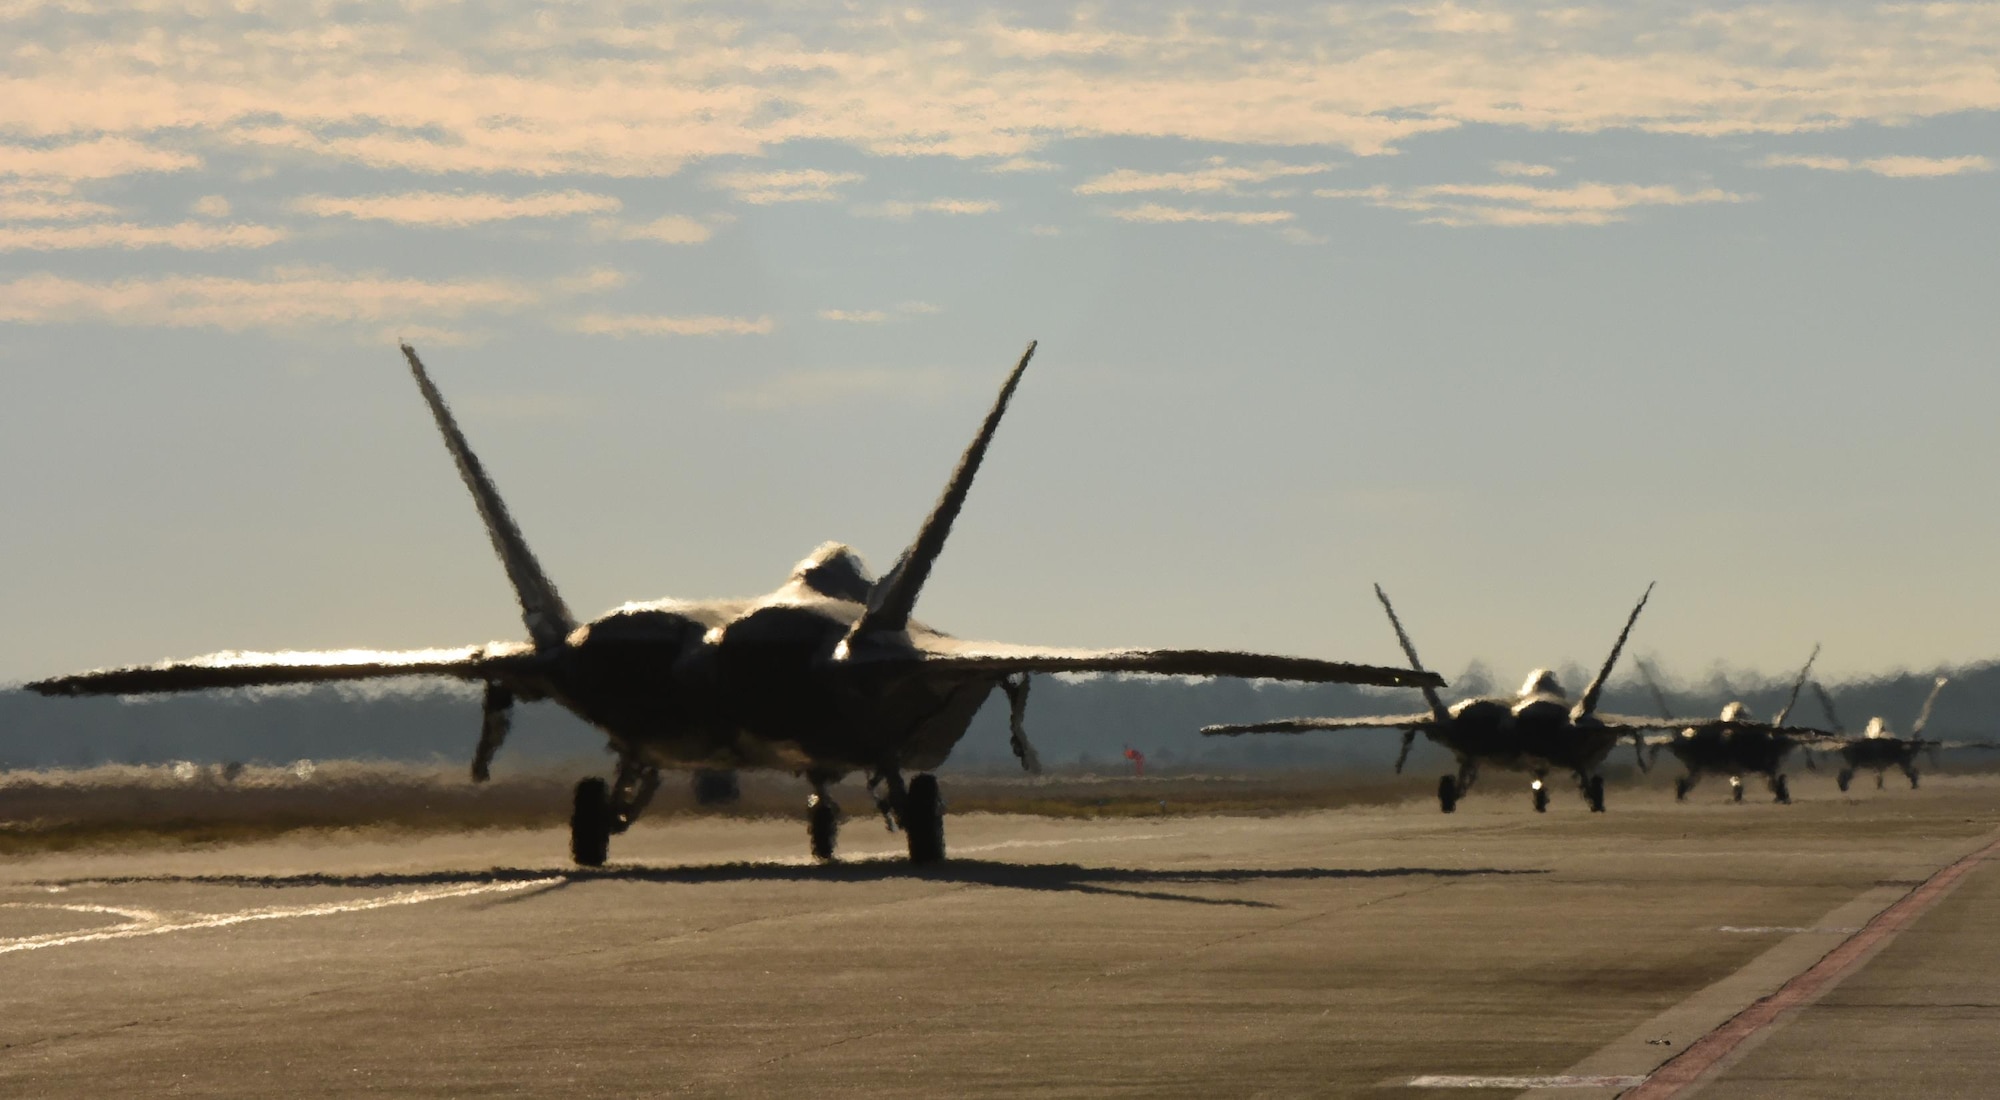 Four U.S. Air Force F-22 Raptors from Tyndall Air Force Base, Fla., taxi down Tyndall’s flightline during Checkered Flag 17-1, Dec. 8, 2016. During the exercise, the units involved are evaluated on their ability to mobilize, integrate, deploy and employ combat air power assets on a large scale. (U.S. Air Force photo by Staff Sergeant Alex Fox Echols III/Released)